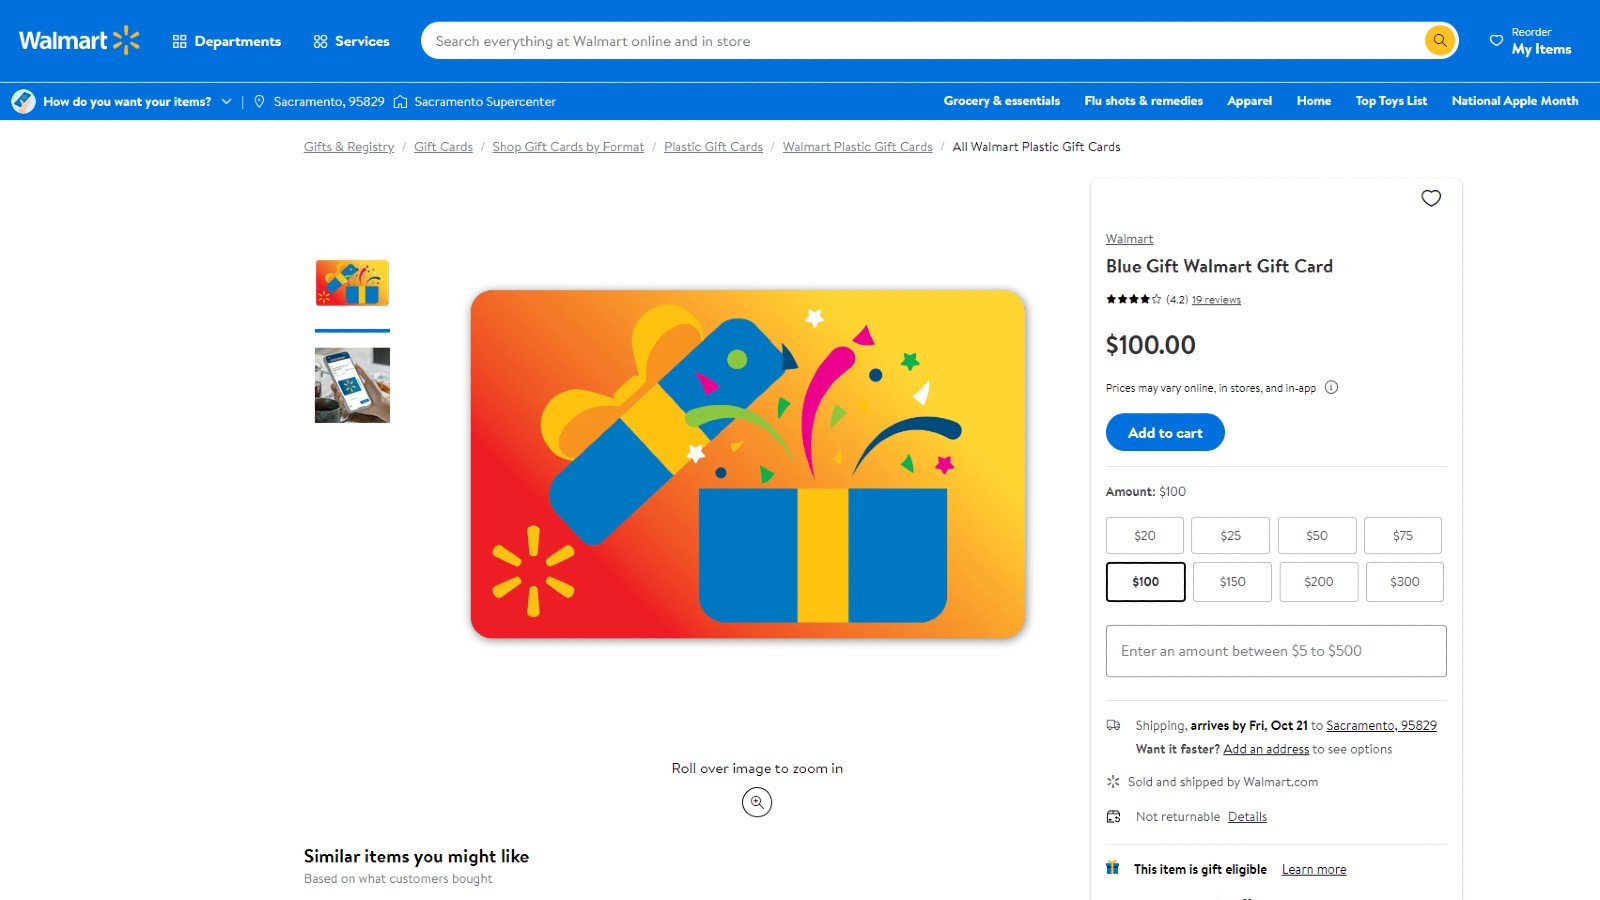 Gift card is product type offered by many online stores